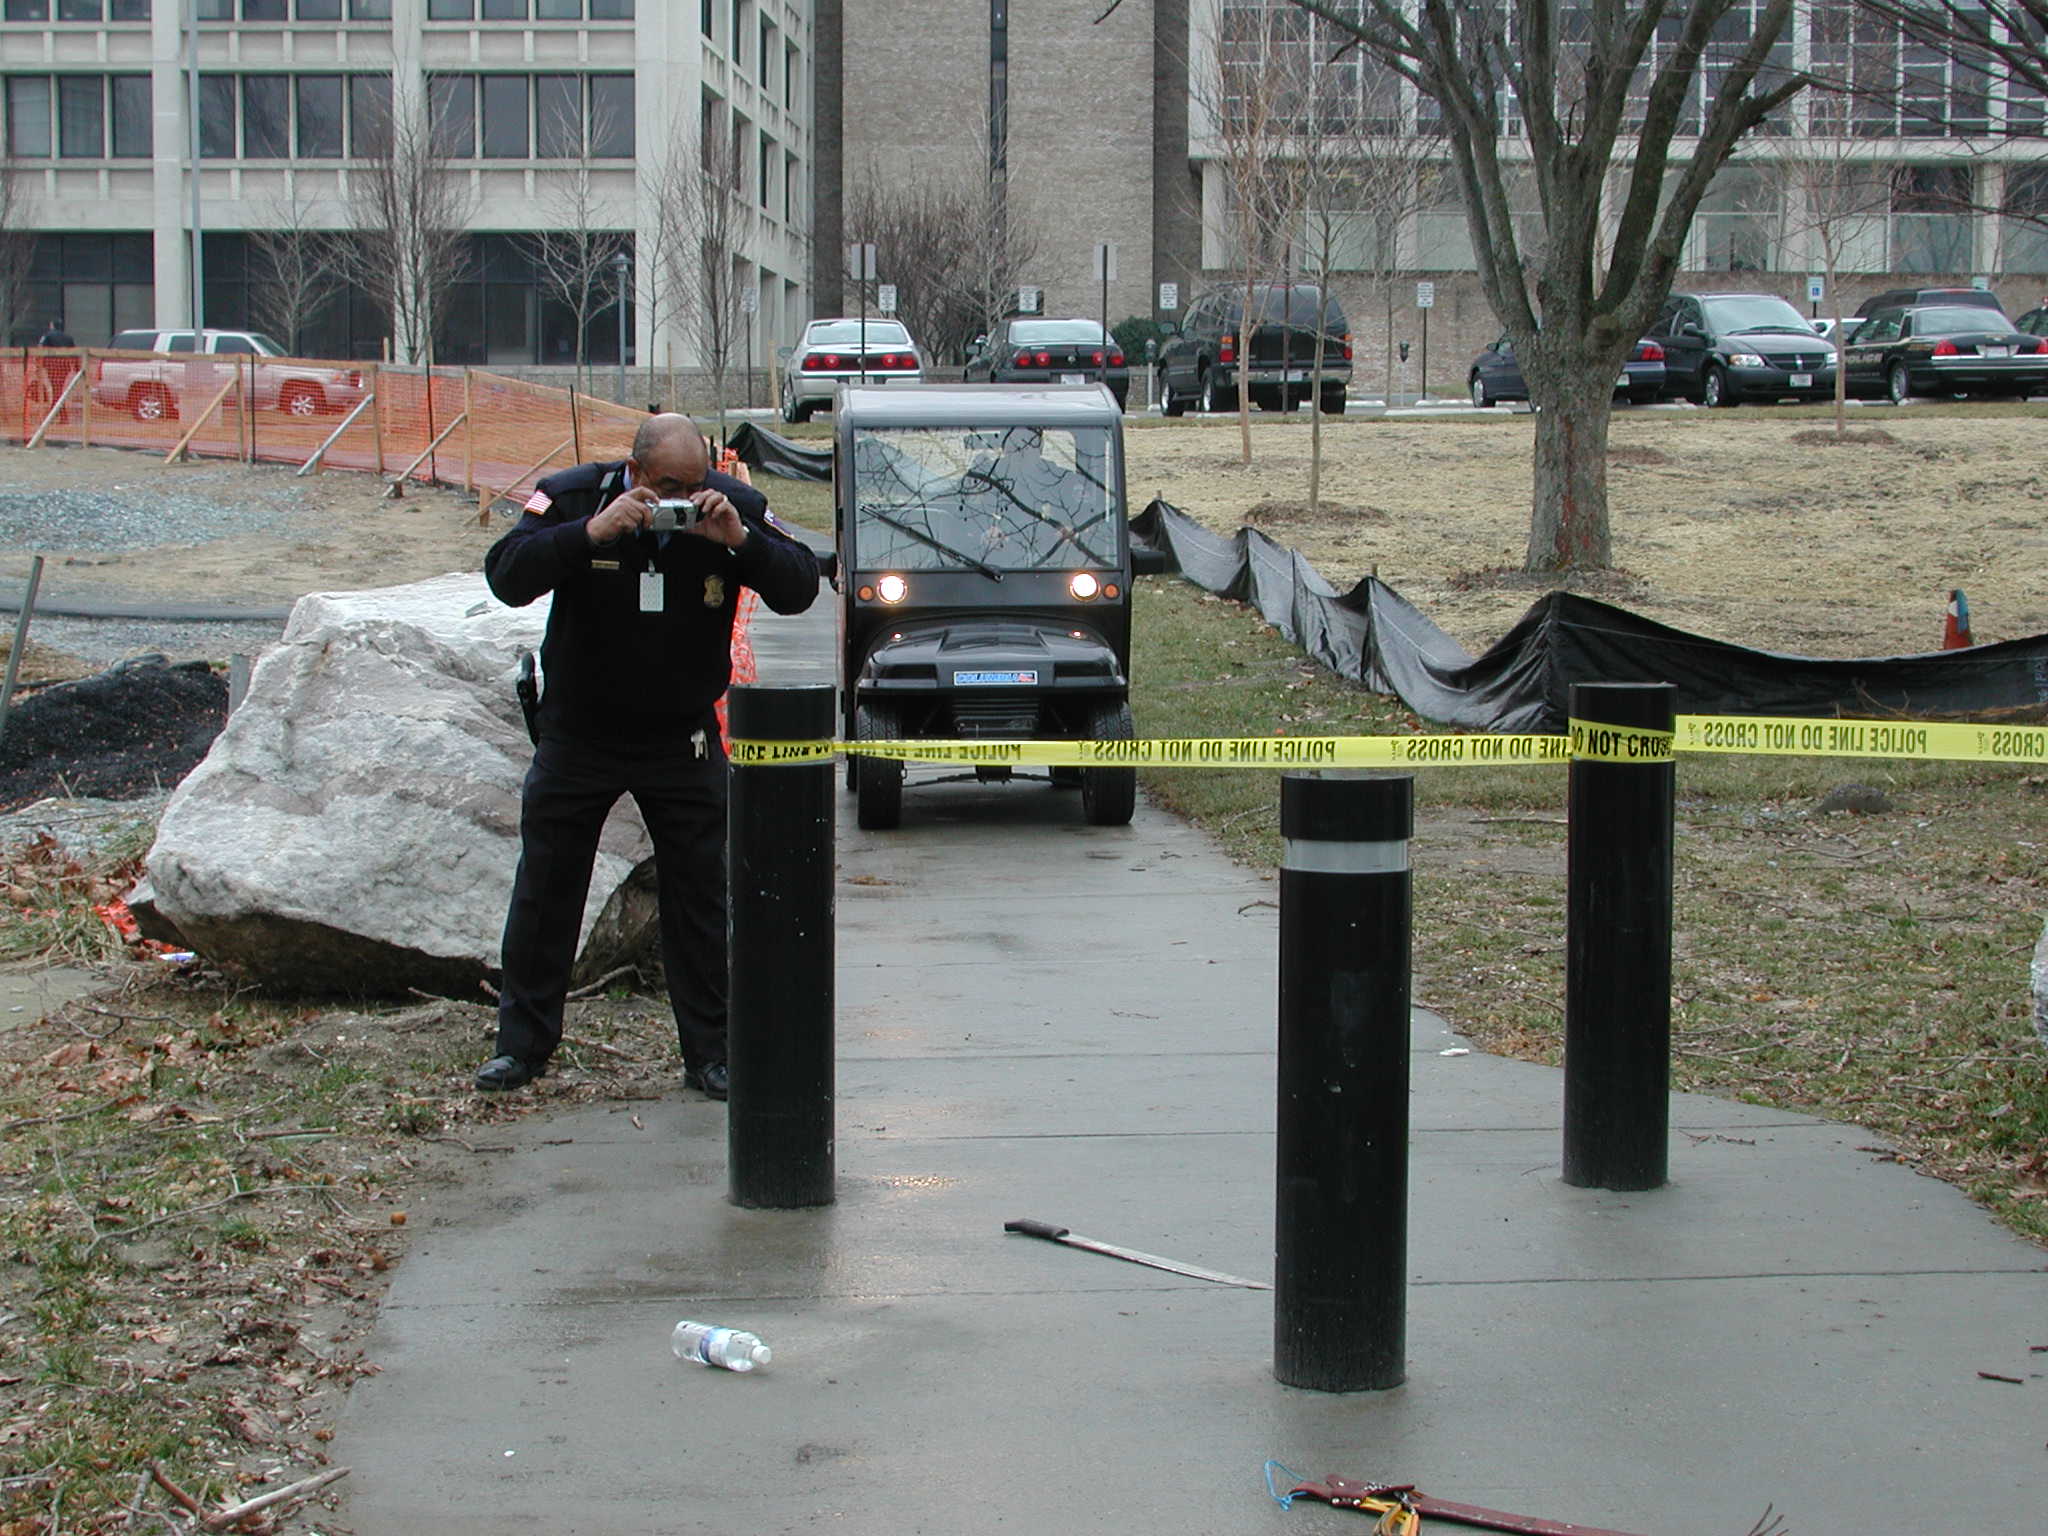 Outdoor crime scene officer taking a phot and police cart arriving 2.JPG